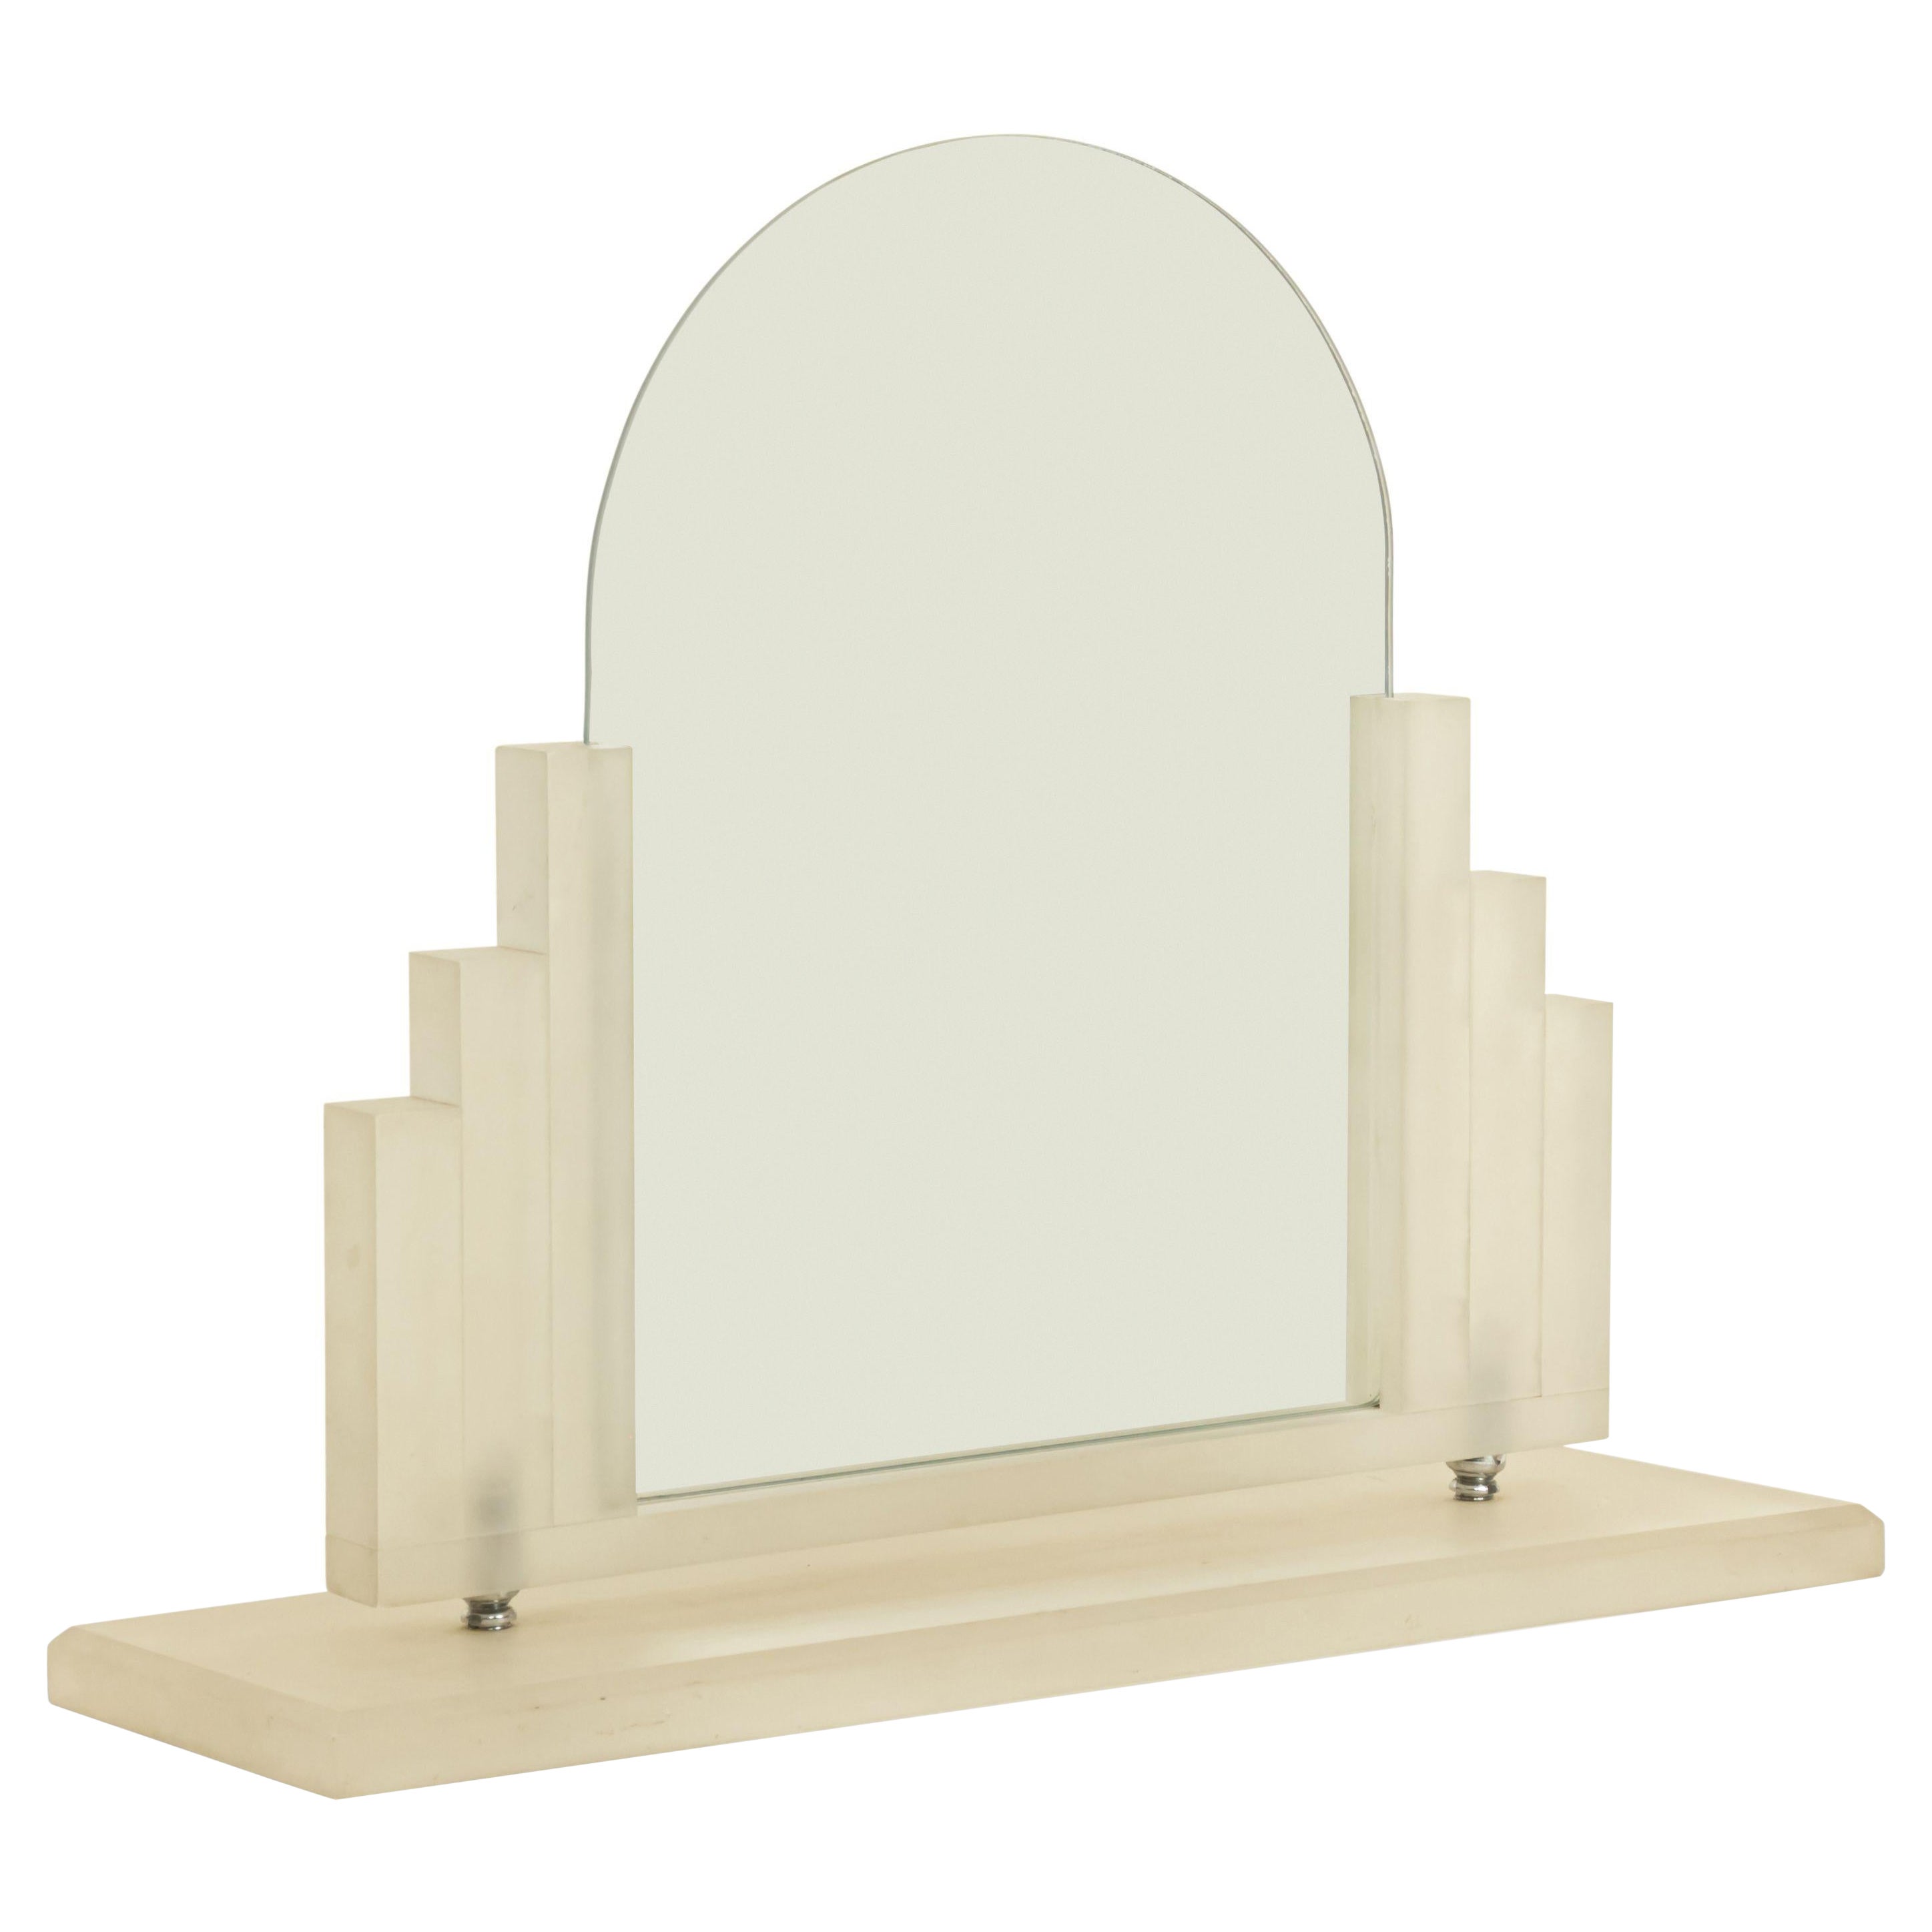 American Art Deco Style Frosted Lucite Dressing Table / Vanity Mirror